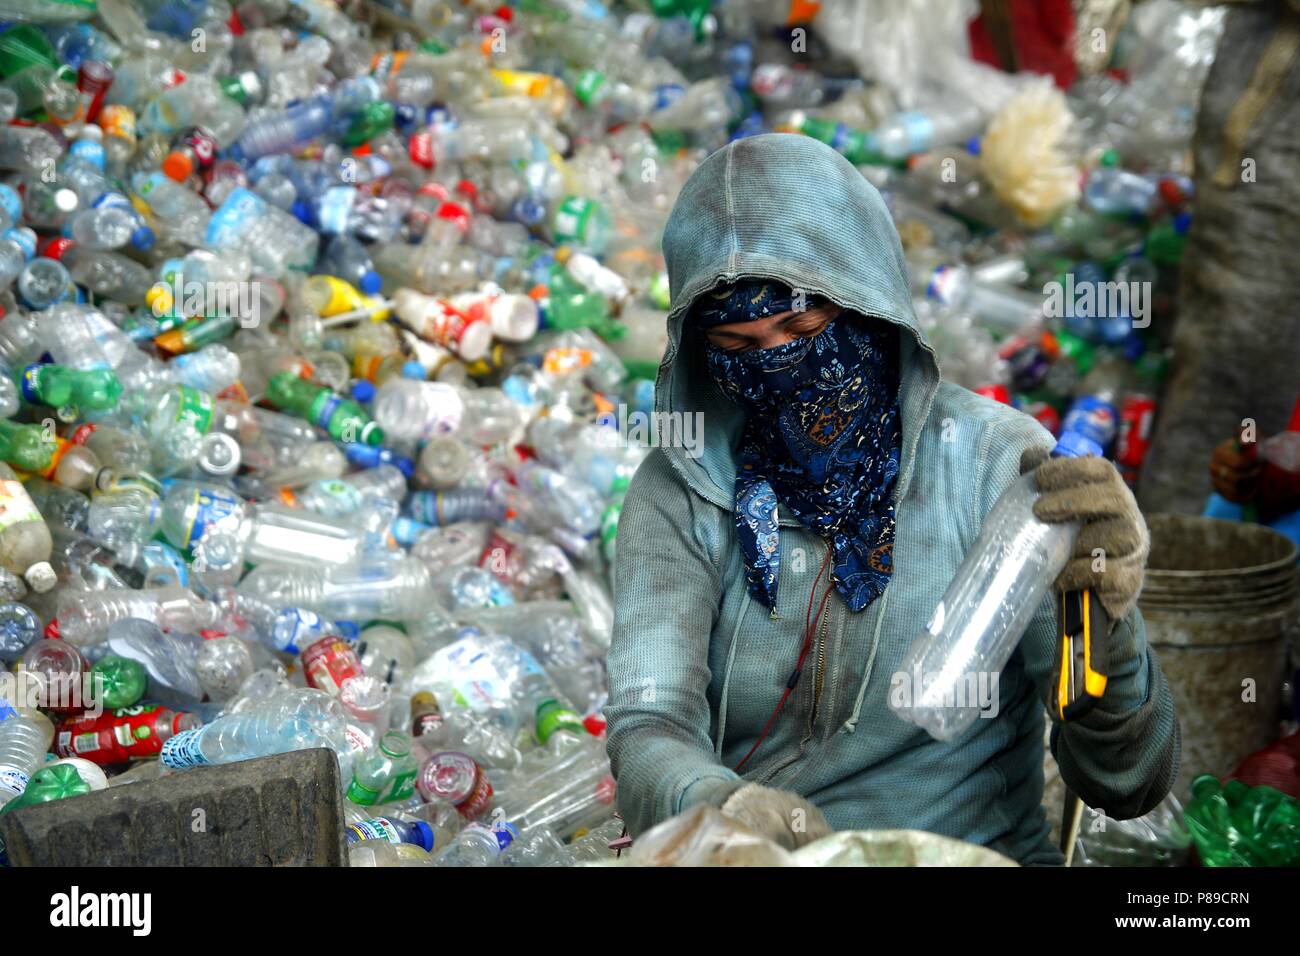 ANGONO, RIZAL, PHILIPPINES - JULY 4 2018: Workers of a materials recovery facility prepare plastic bottles for proper recycling. Stock Photo